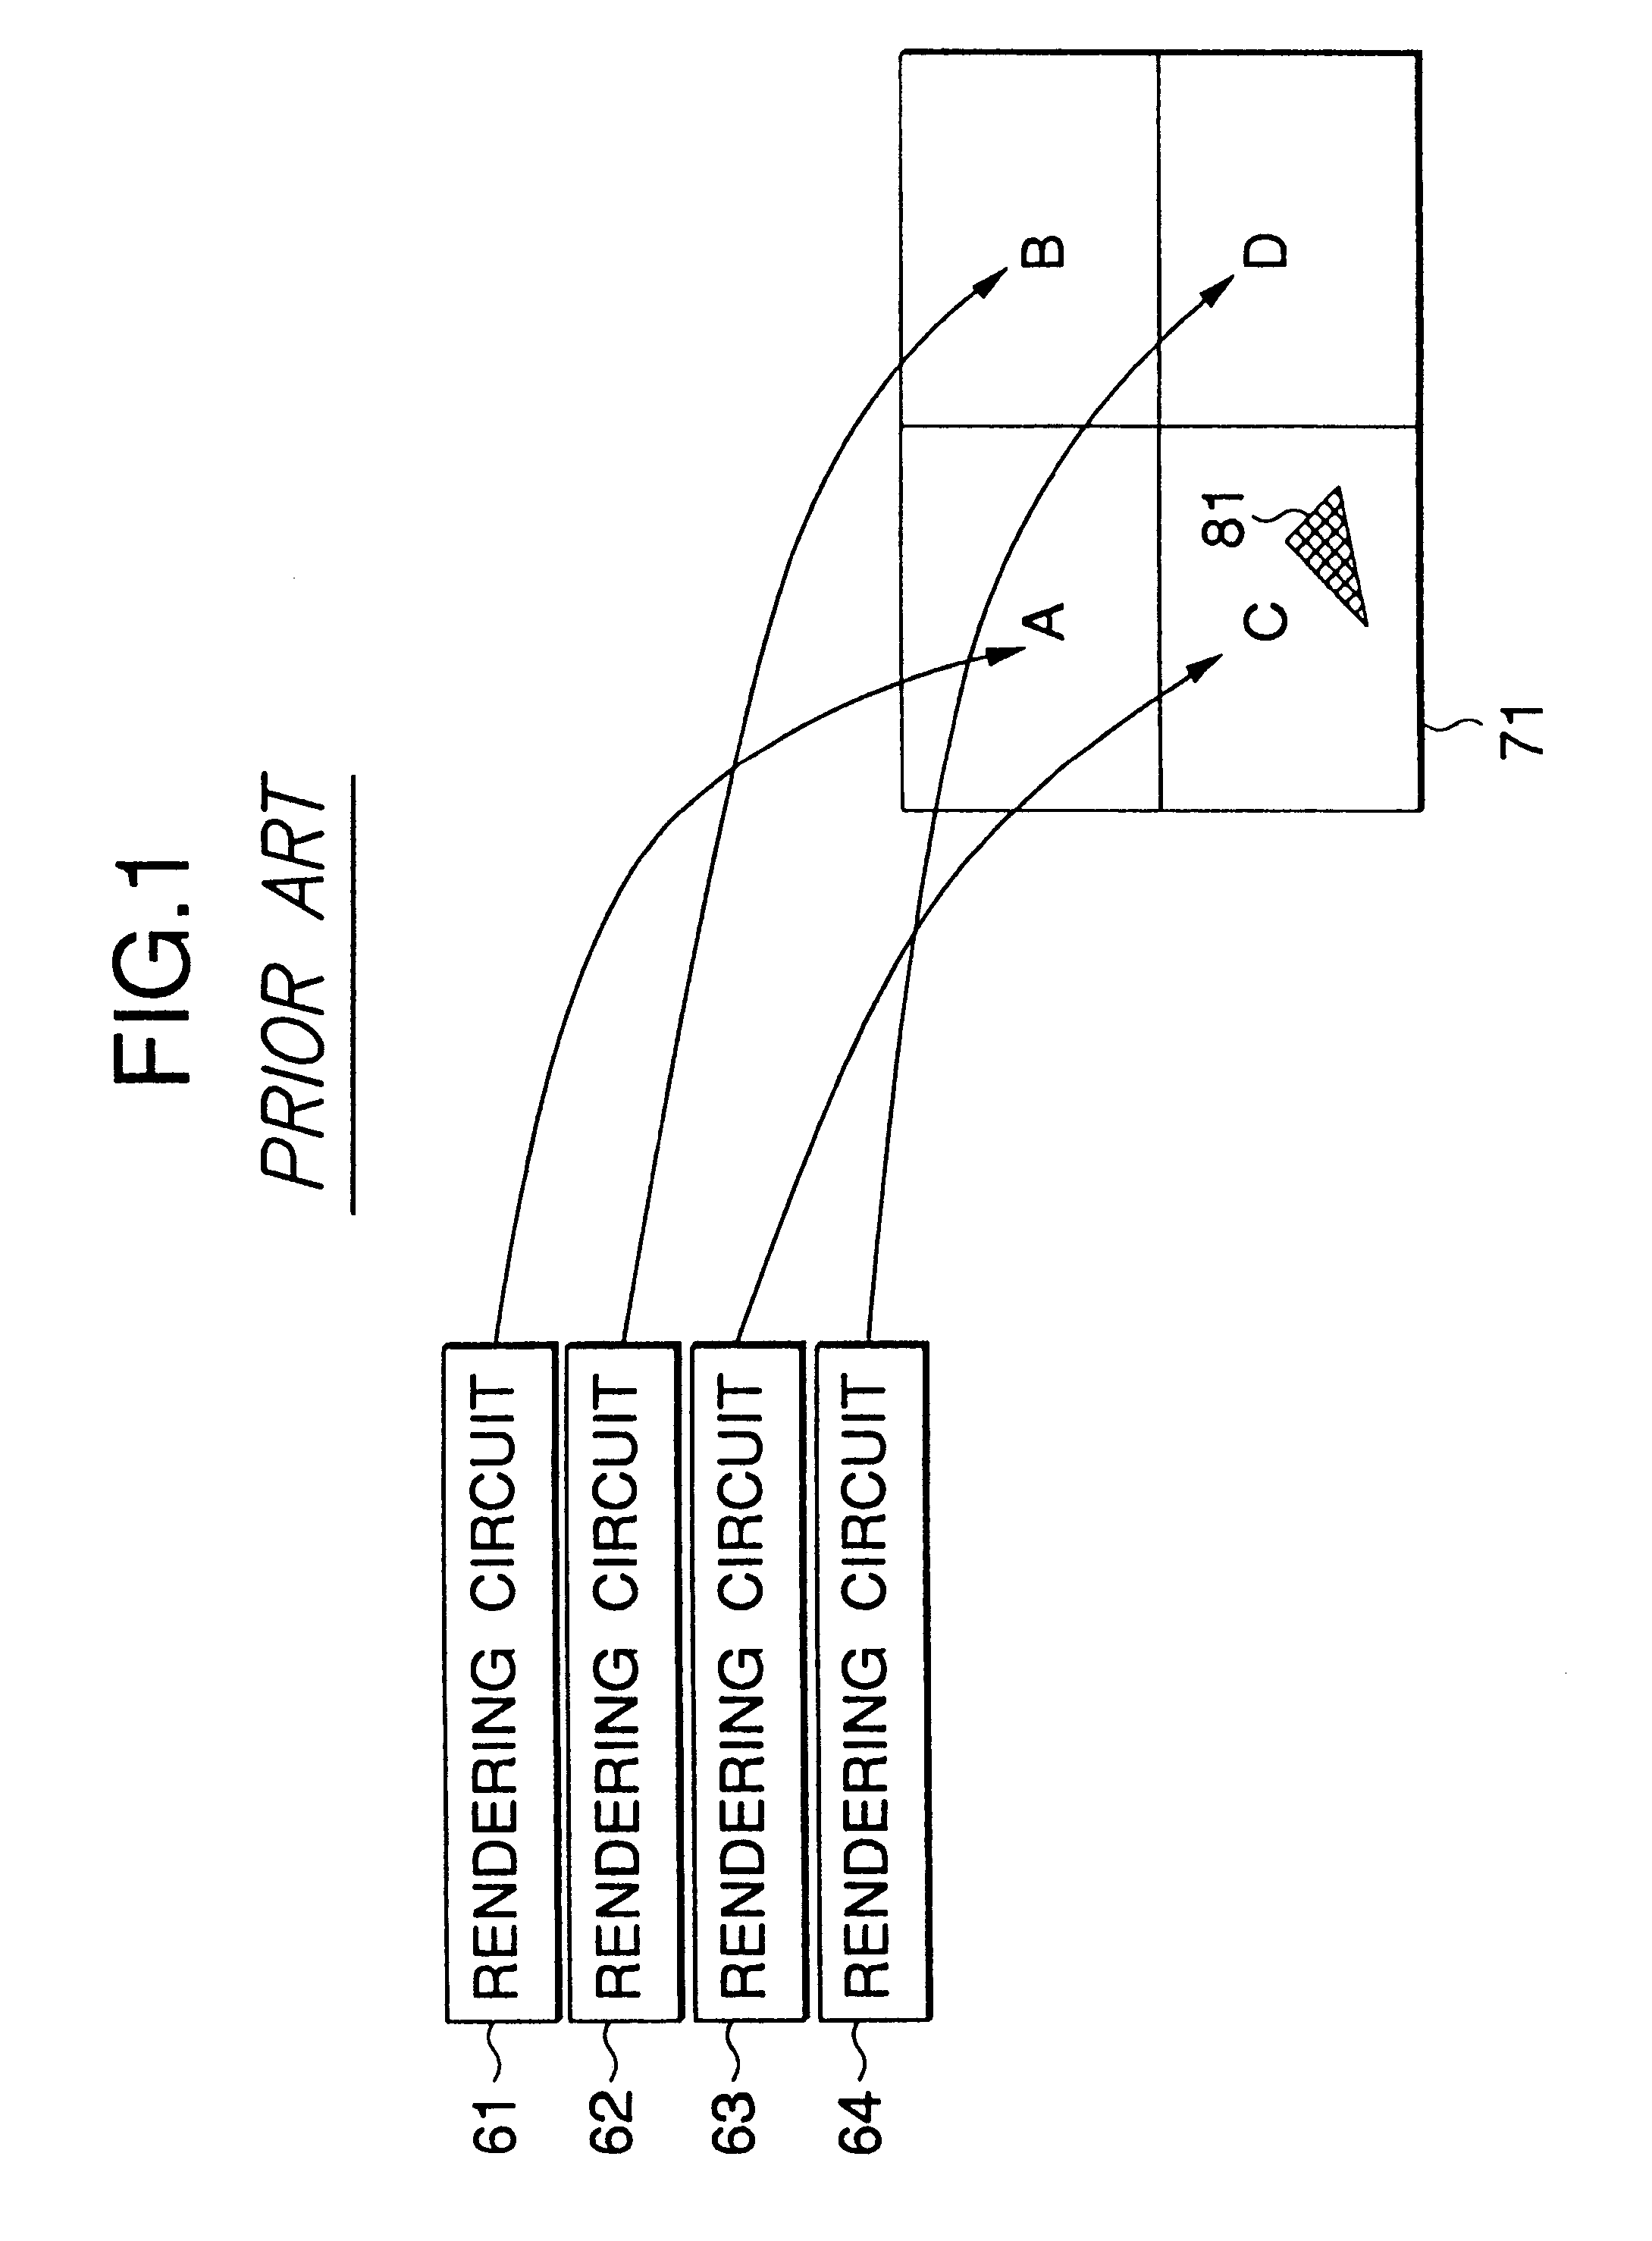 Apparatus and method for parallel rendering of image pixels